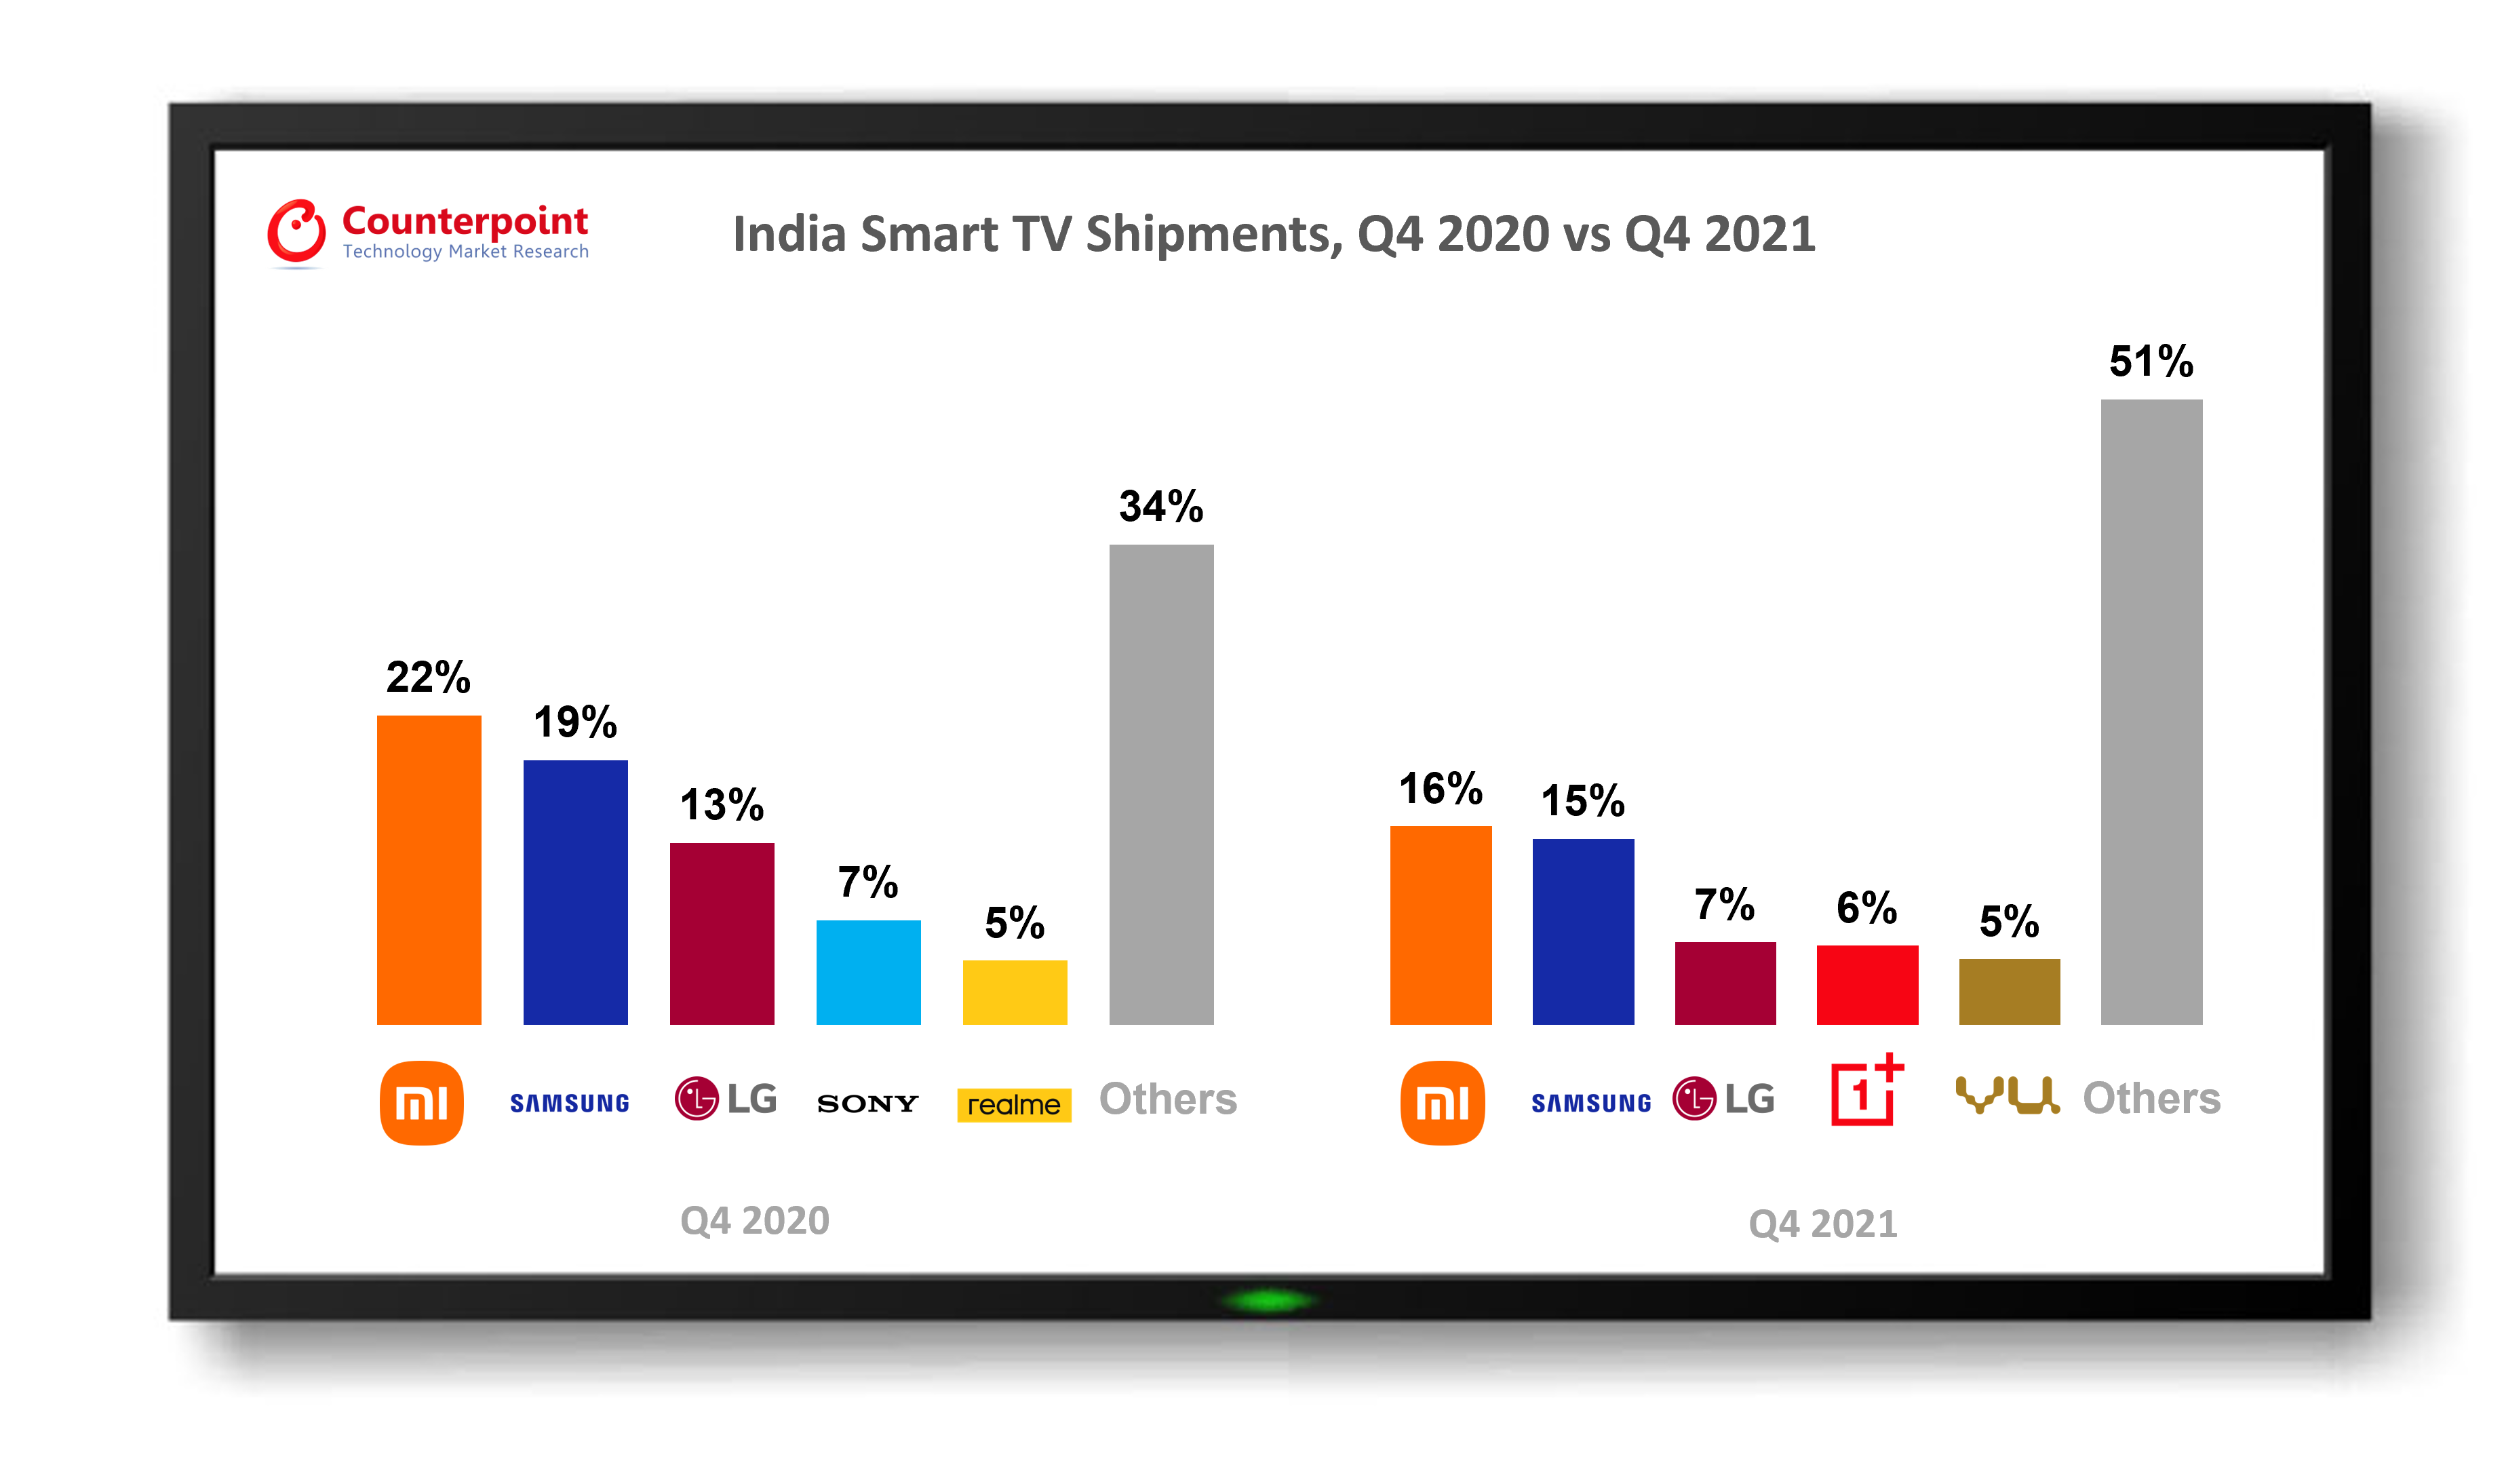 Counterpoint Research: India Smart TV Market Share of Top 5 Brands - Q4 2020 vs Q4 2021